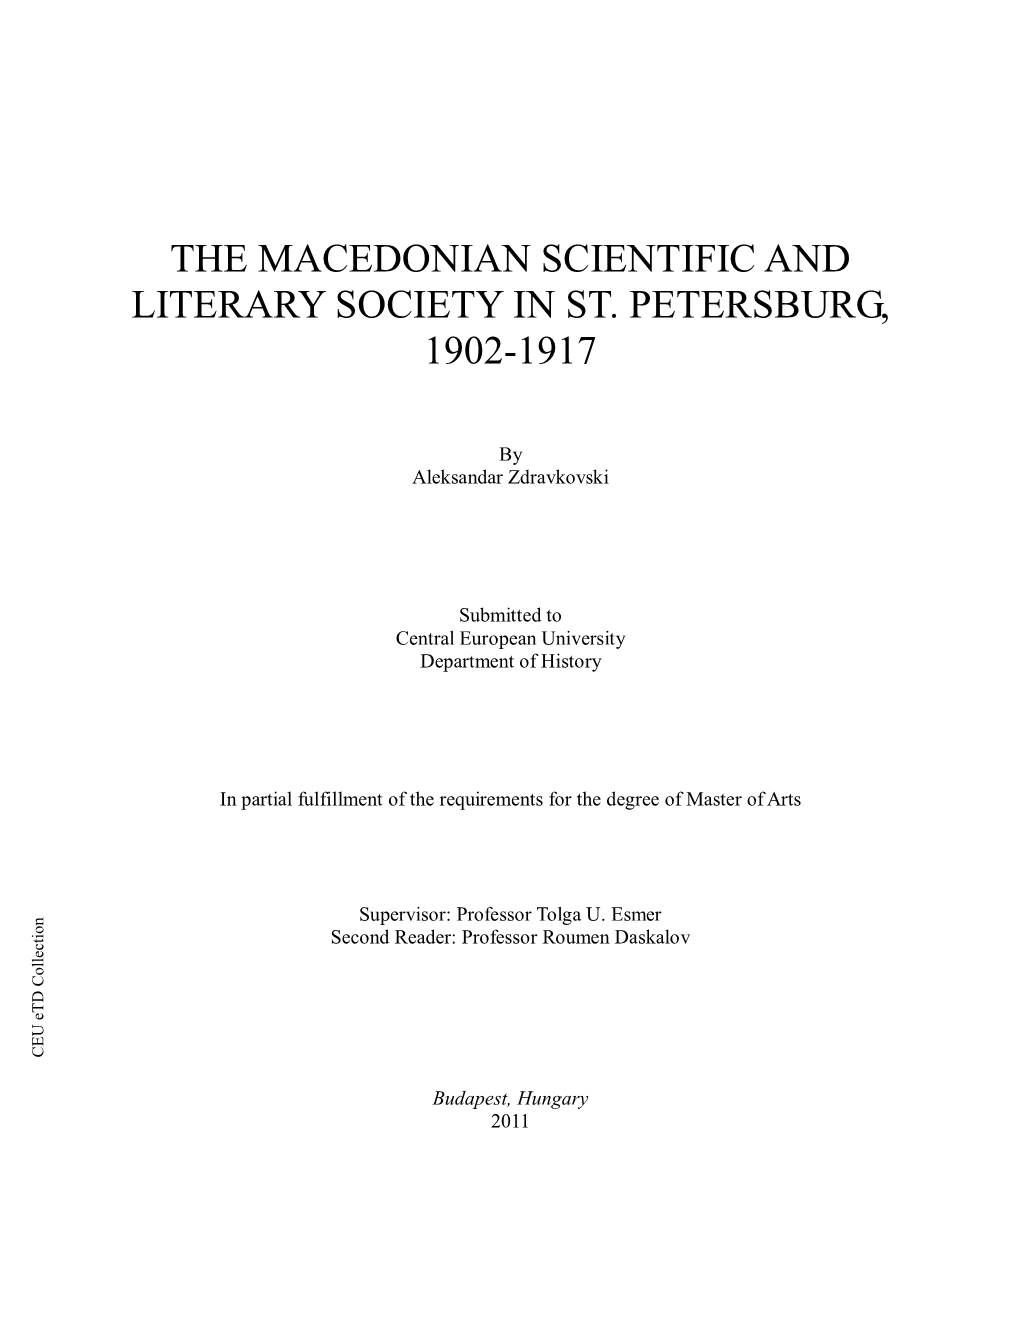 The Macedonian Scientific and Literary Society in St. Petersburg, 1902-1917